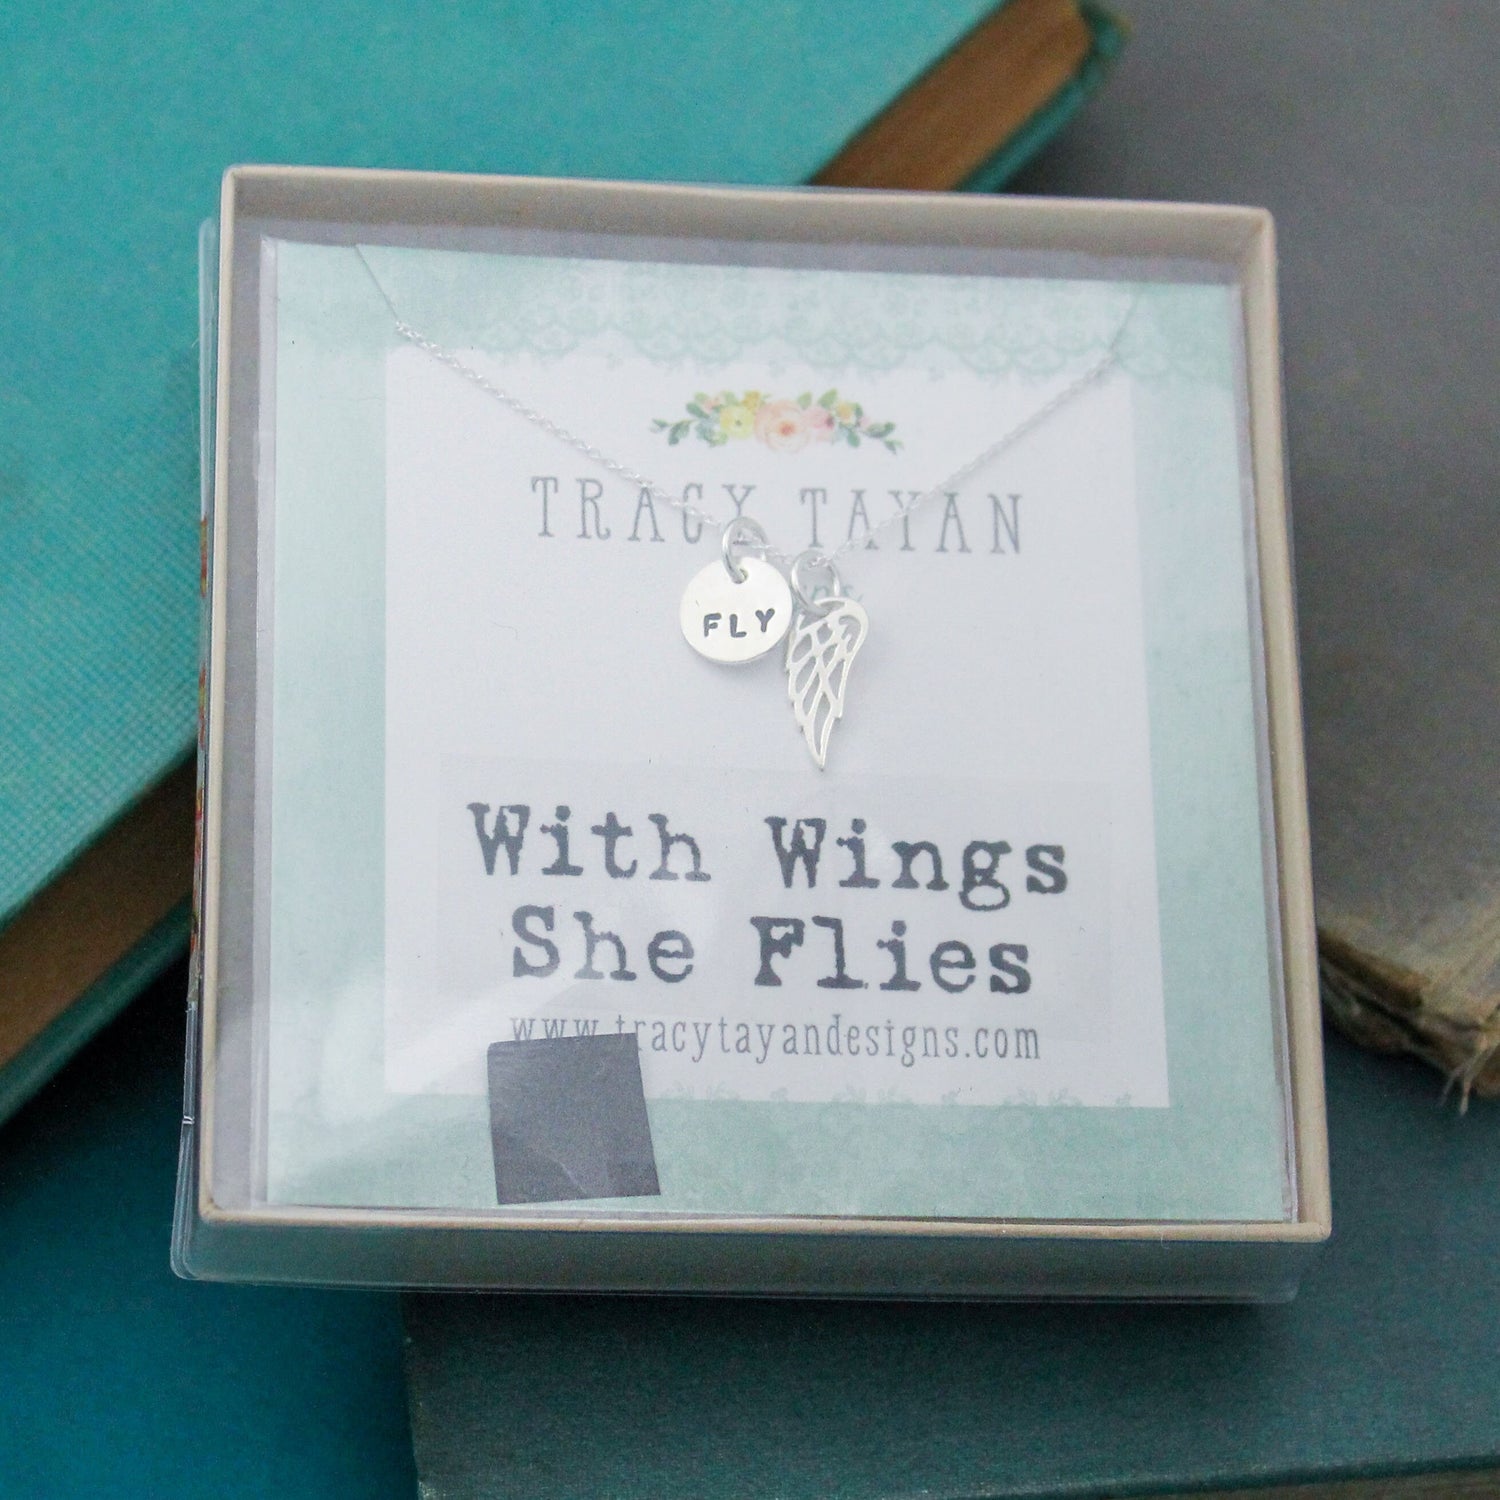 With Wings She Flies Necklace Personalized Sterling Silver, Hand Stamped Jewelry Gift, Fly Jewelry, Fly Wings Box Gift, Hand-Stamped Fly